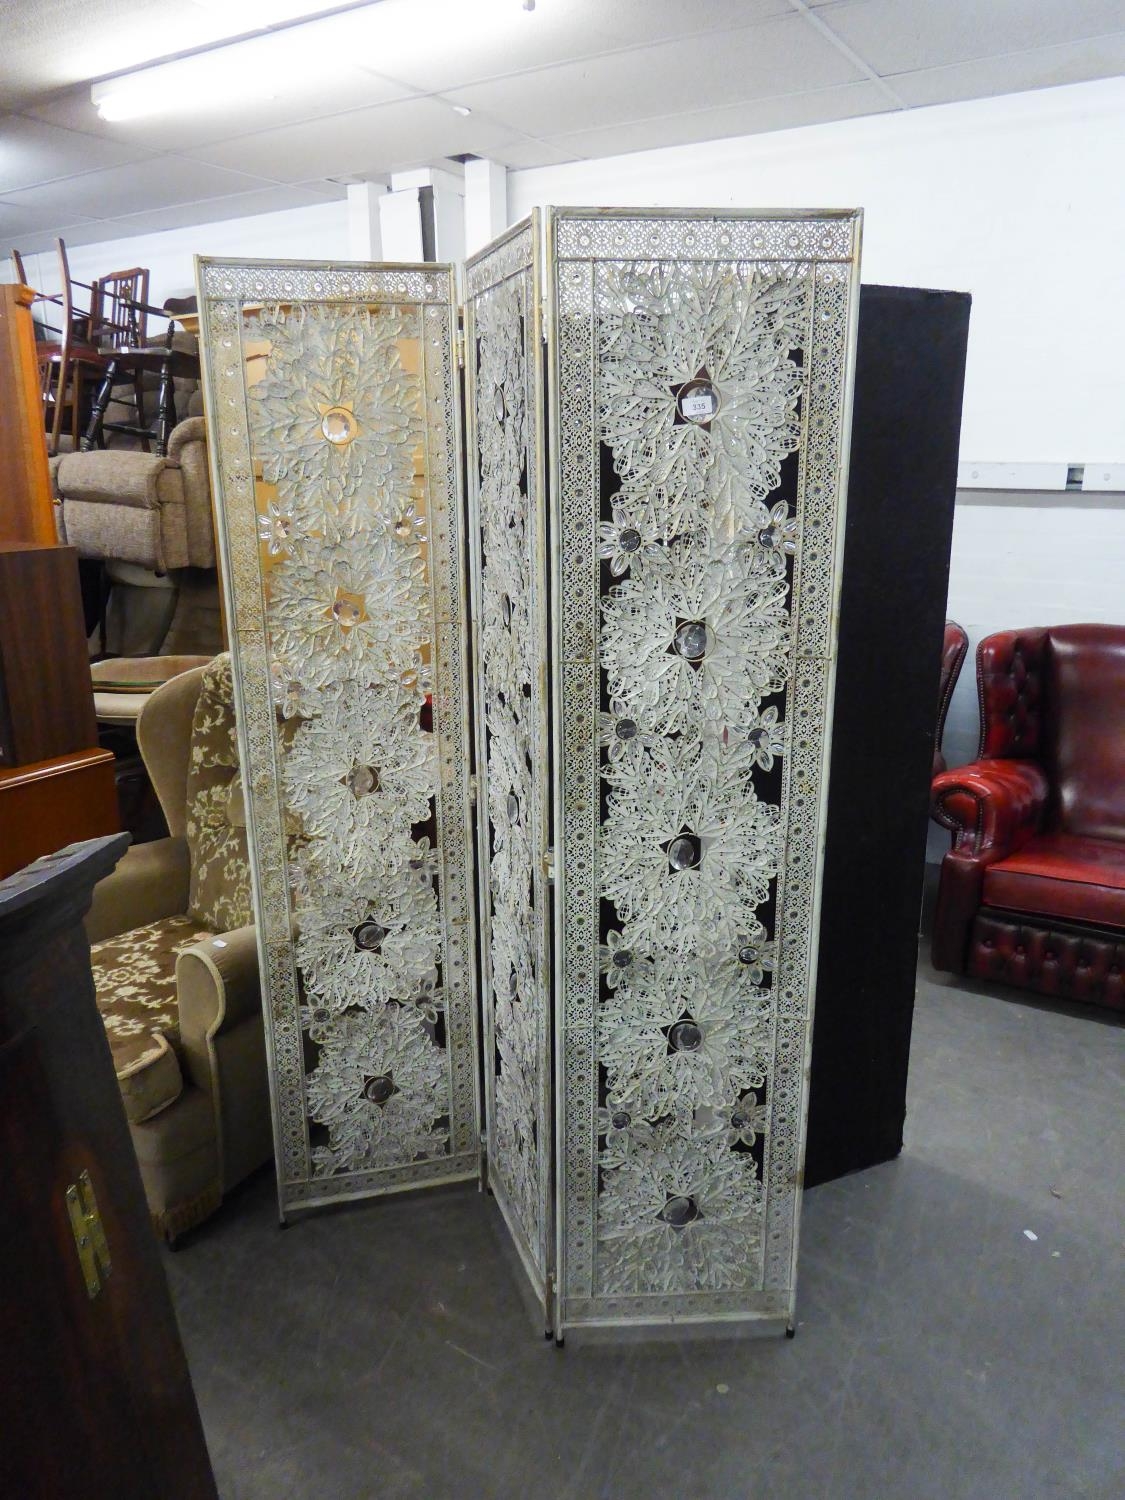 A THREE FOLD ORNATE METAL PRIVACY SCREEN DECORATED WITH FIVE LARGE FLOWERS TO EACH PANEL (173cm)